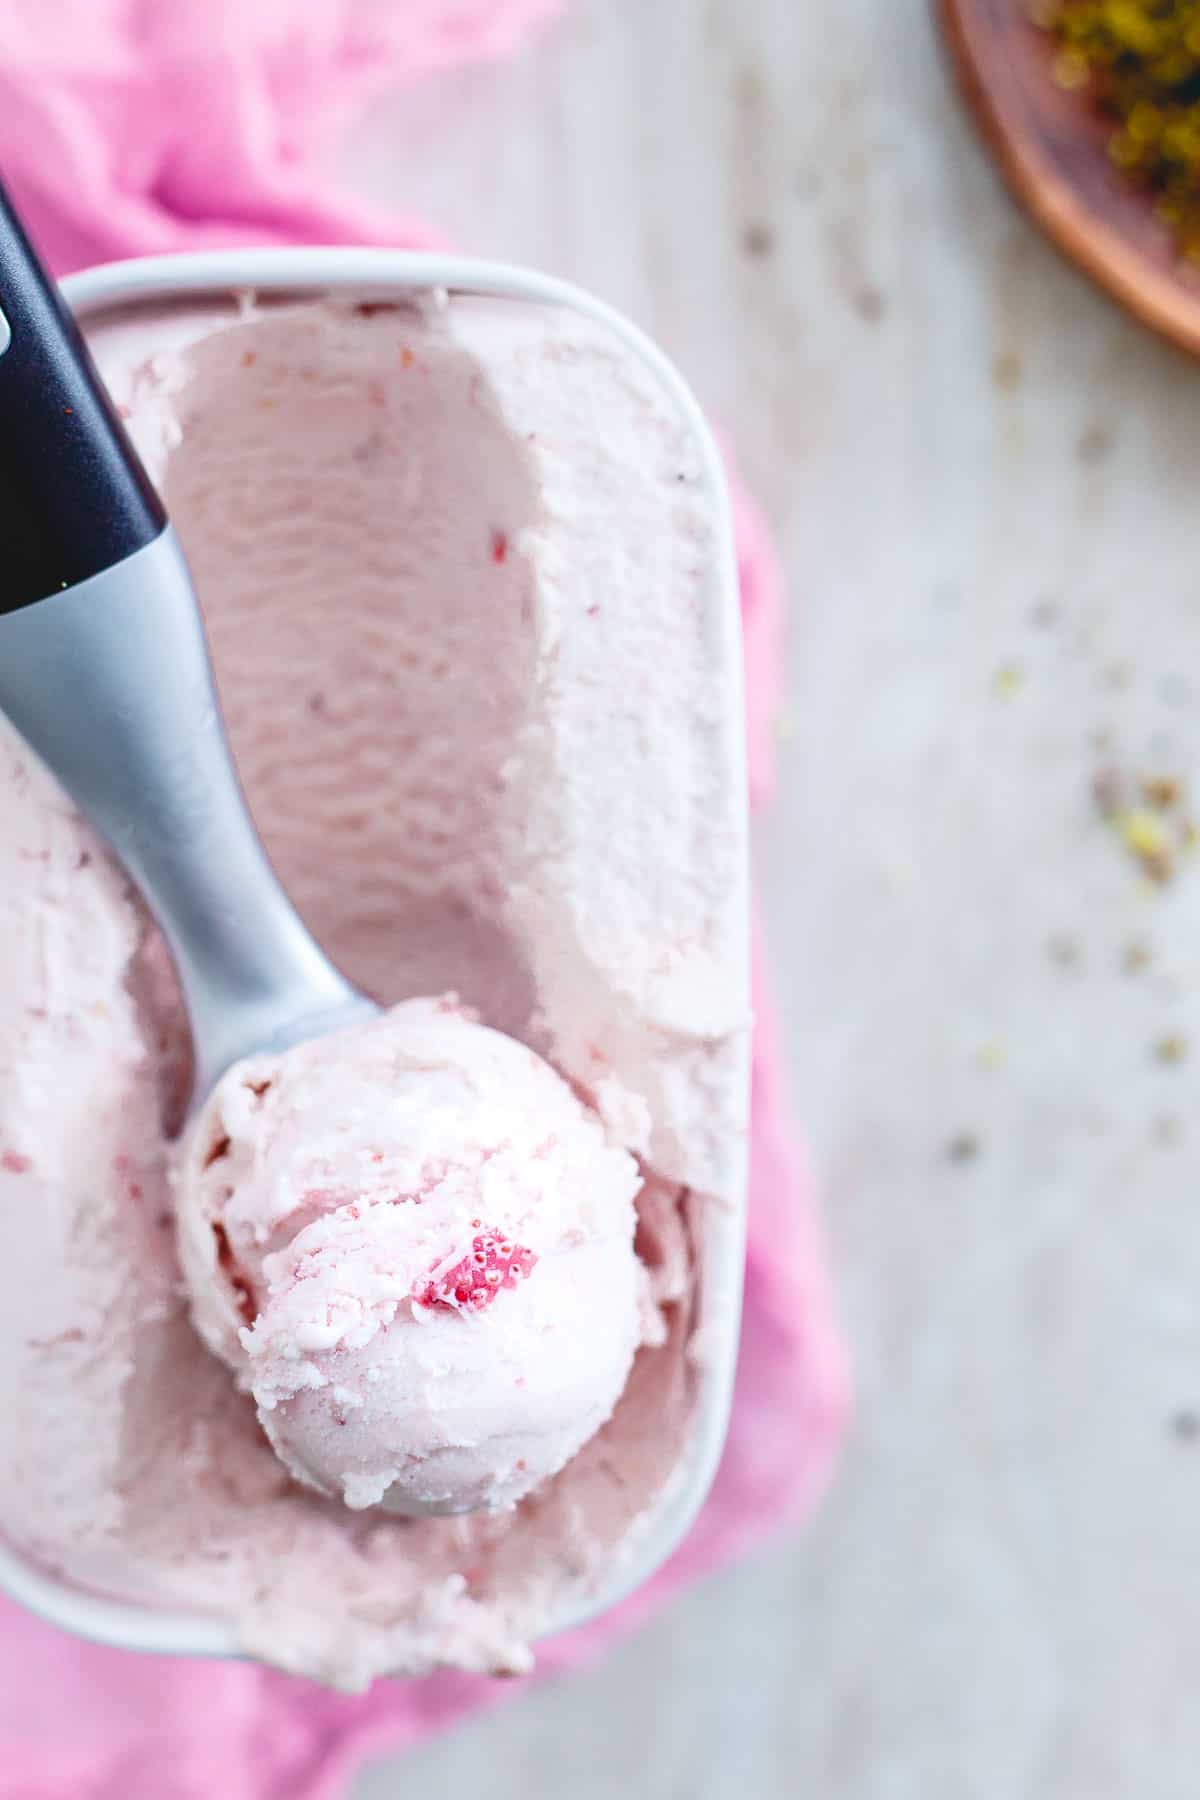 This strawberry basil milkshake is a mostly healthy treat, just a small scoop of strawberry ice cream brings the perfect amount of decadence to each sip.